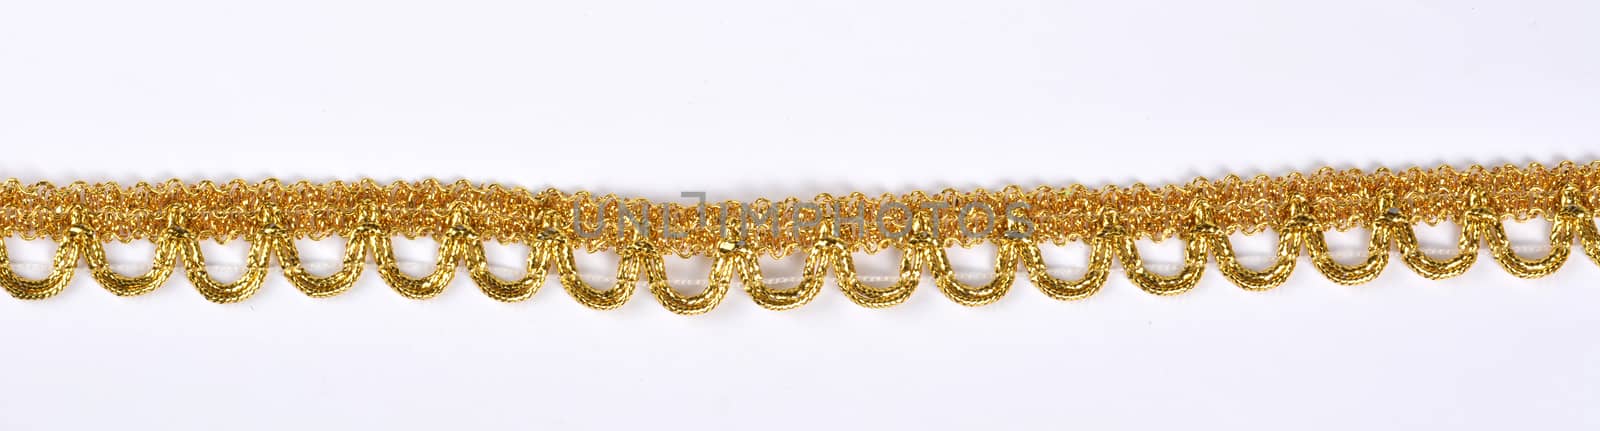 Braid lace made Luxury Metallic golden cord on white background. decoration for carnival and dance clothes costumes. Christmas texture. banner for website